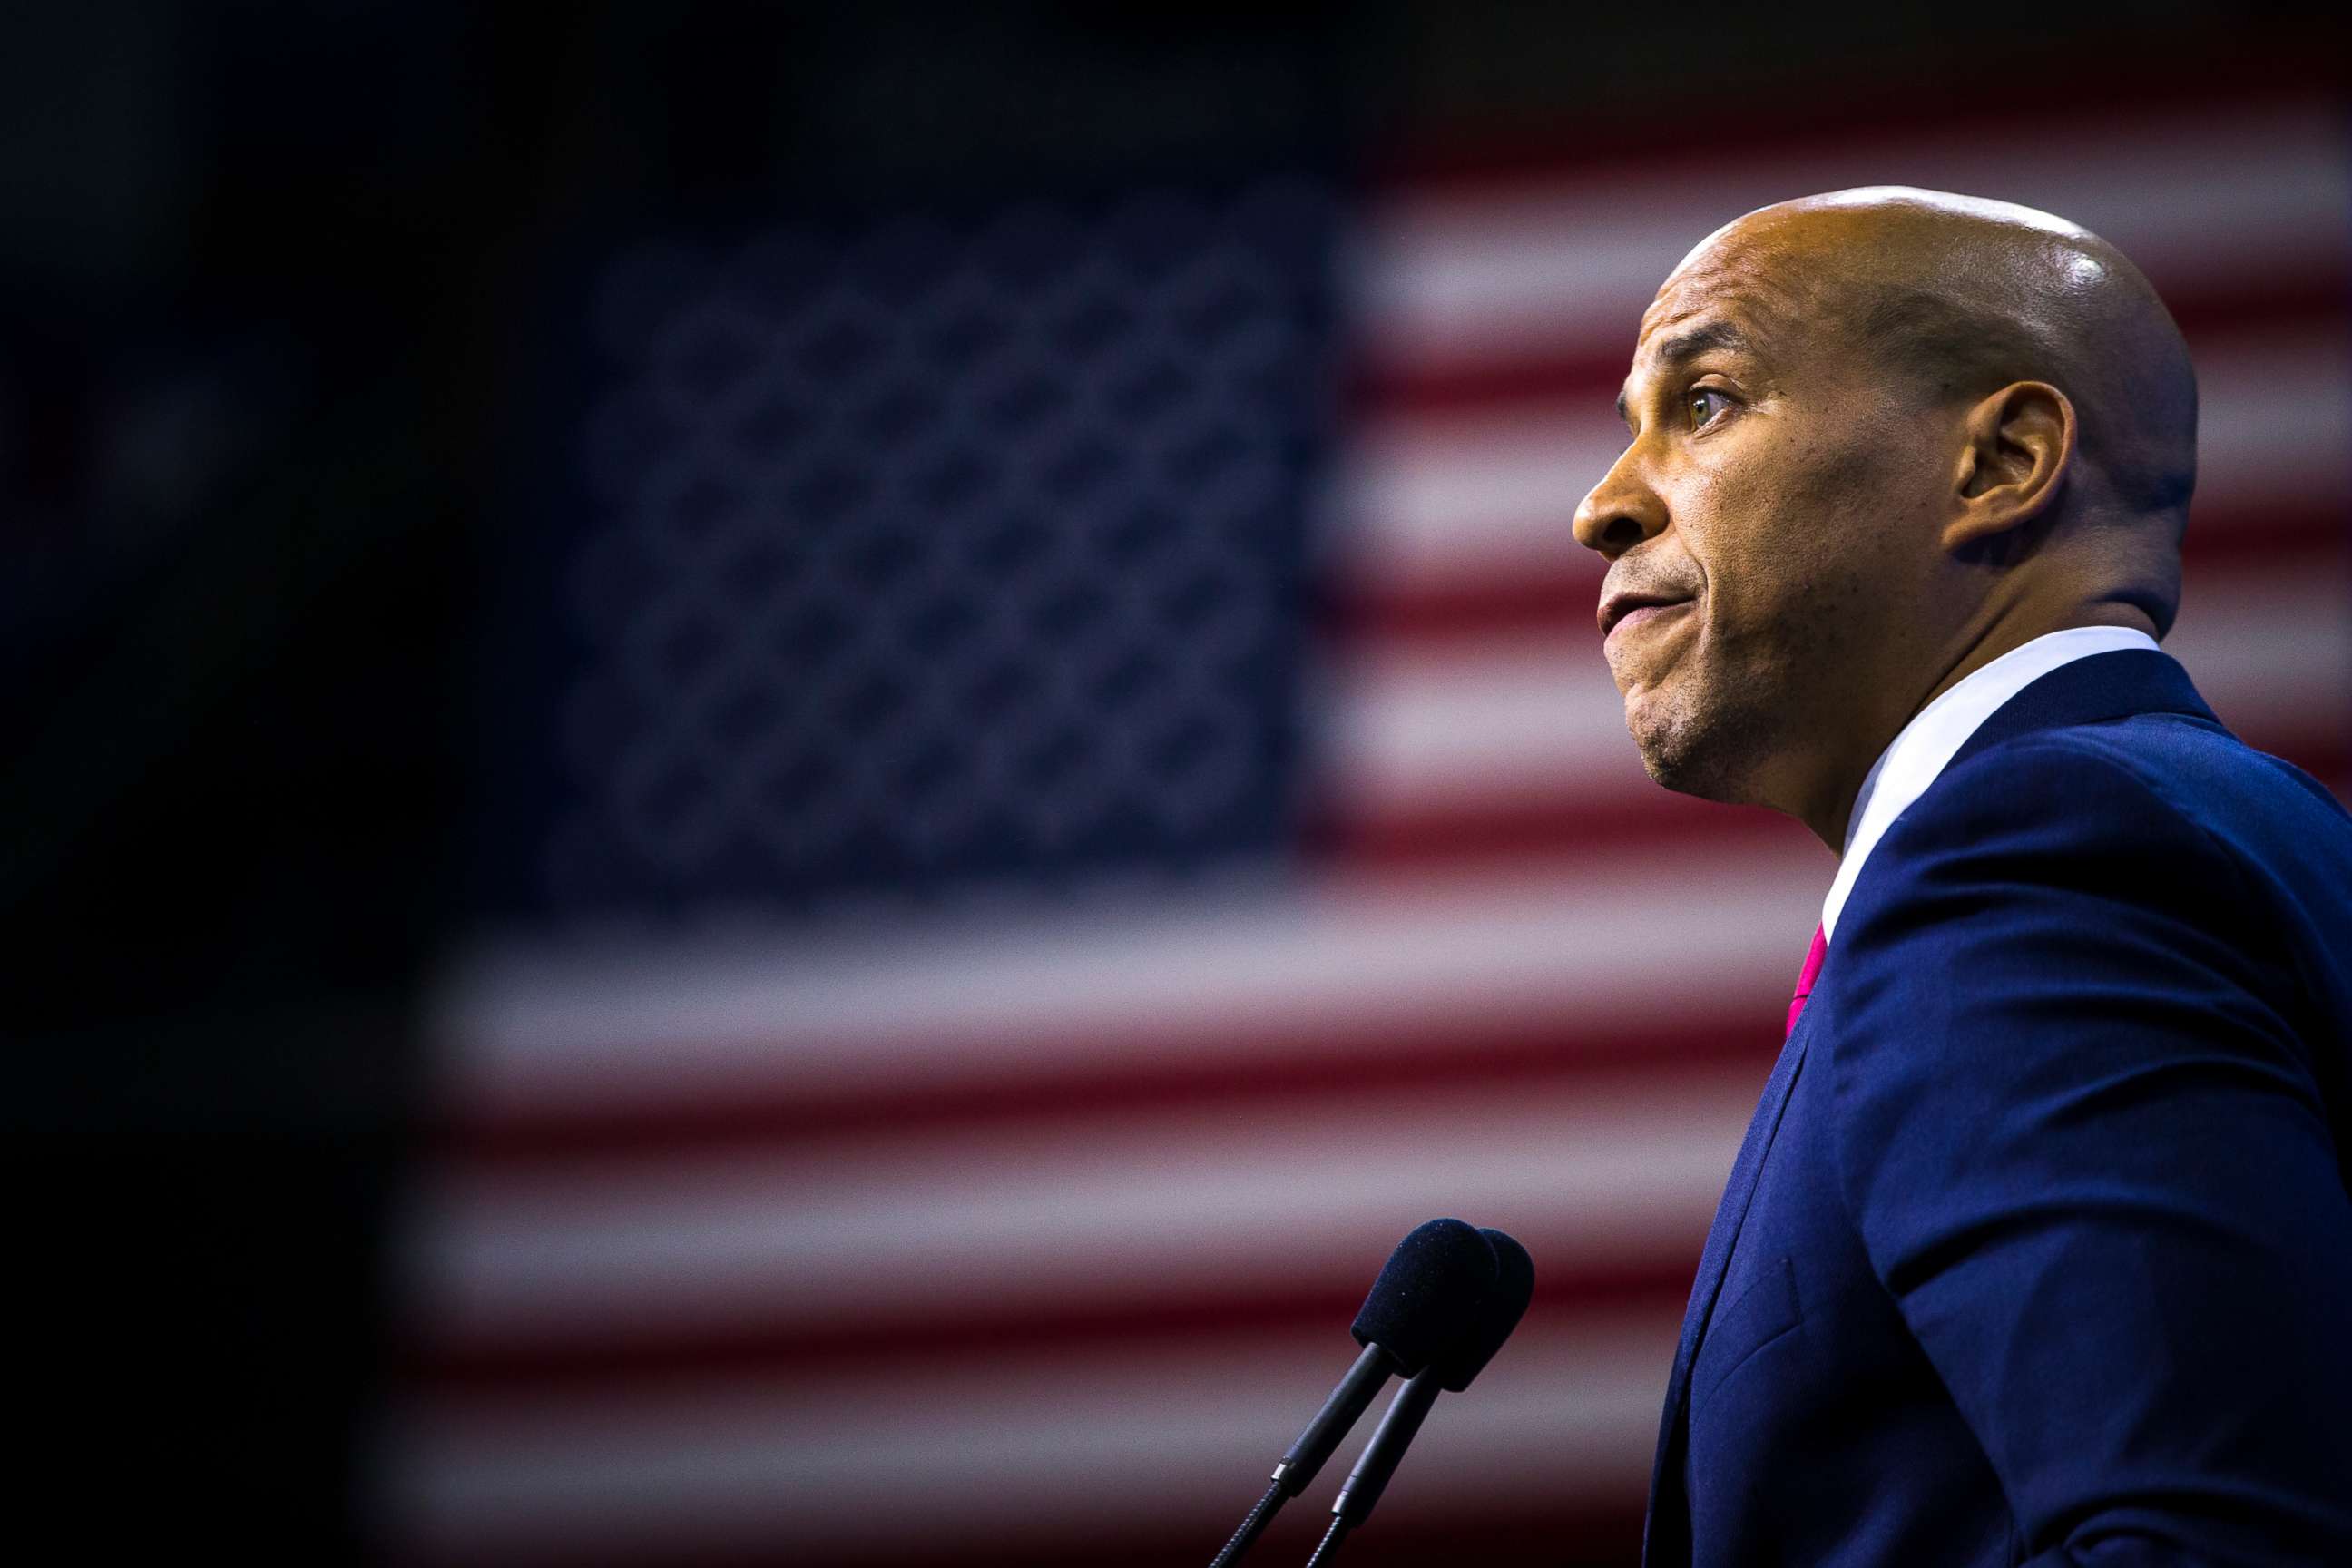 PHOTO: U.S. Senator Cory Booker speaks during the New Hampshire Democratic Party State Convention at the SNHU Arena in Manchester, NH on Sep. 7, 2019.